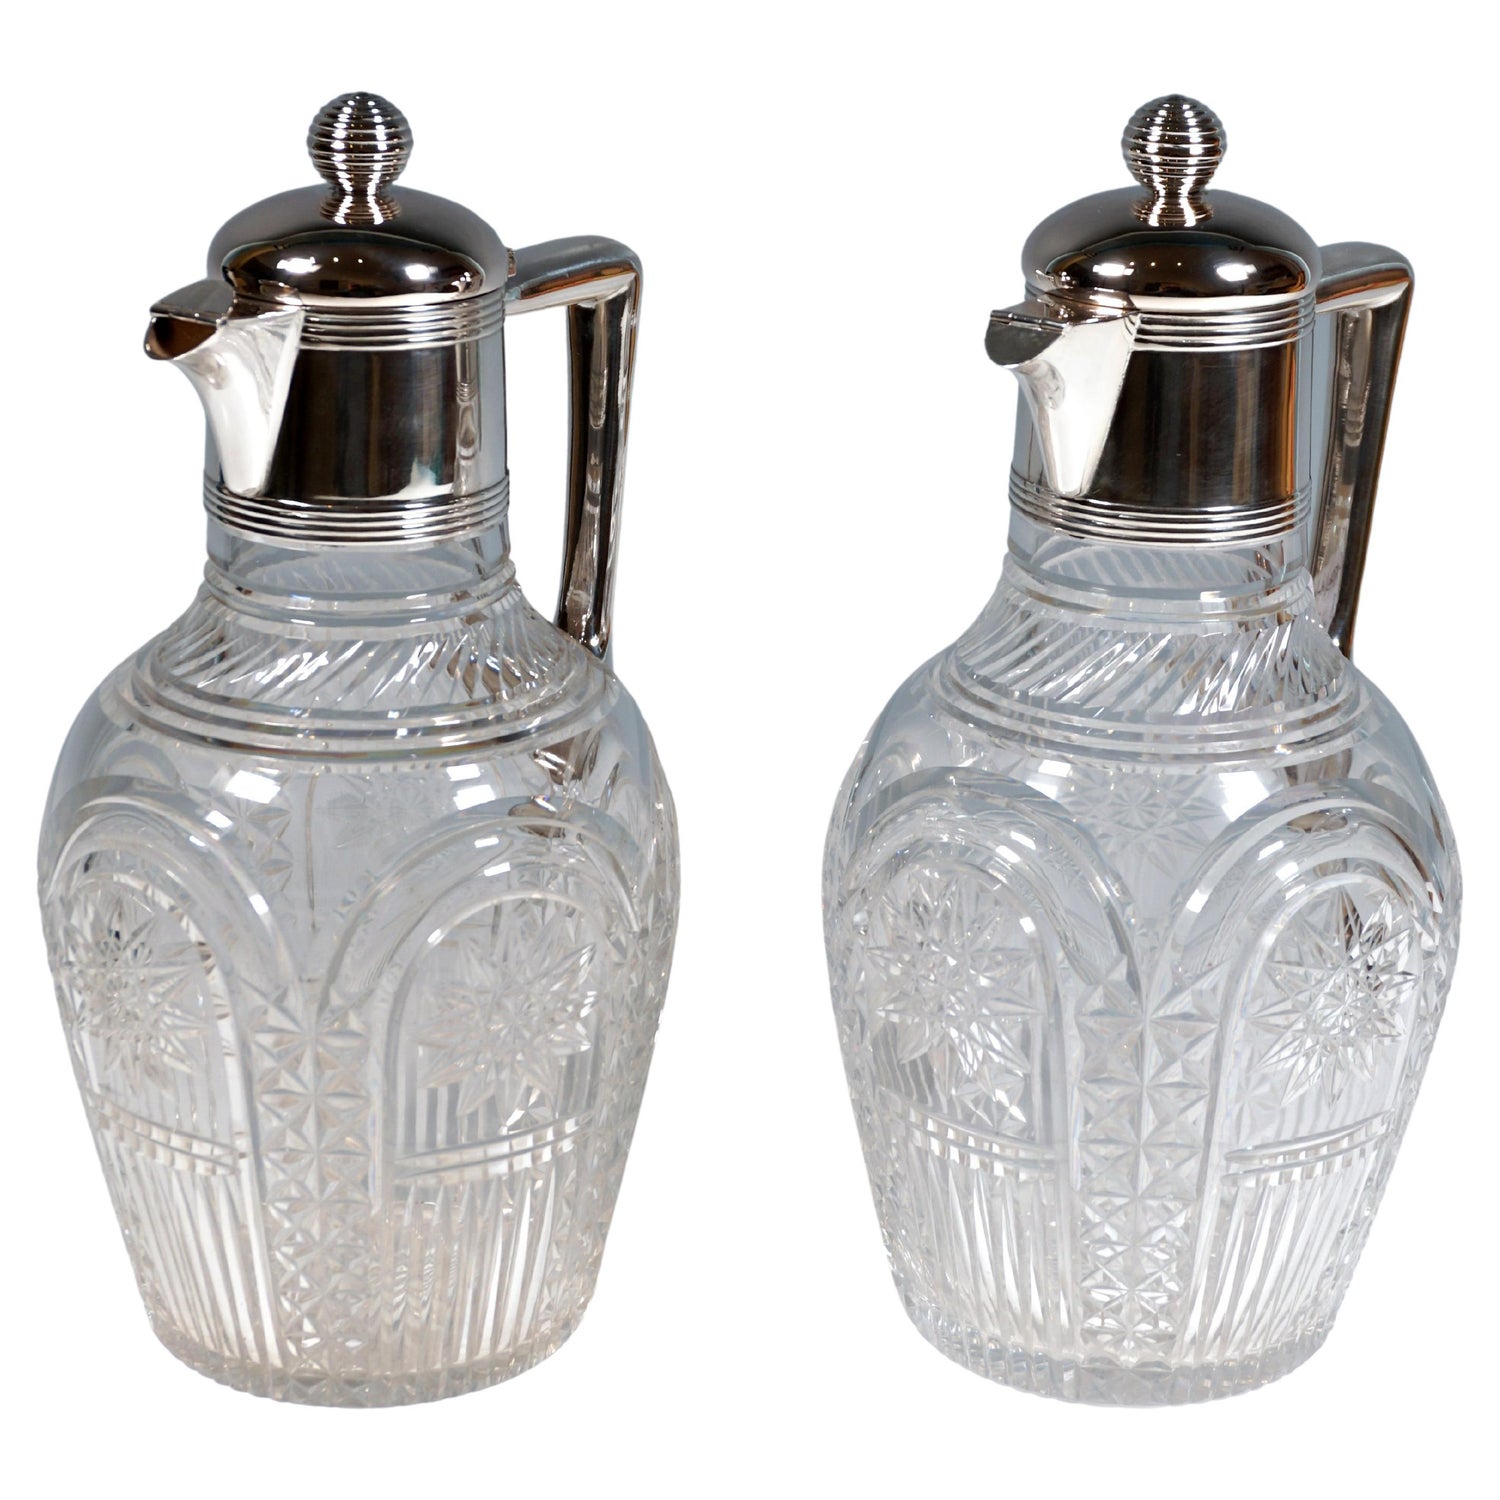 https://a.1stdibscdn.com/pair-of-art-nouveau-glass-carafes-with-silver-mounts-koch-bergfeld-germany-for-sale/f_10144/f_278354821647531091318/f_27835482_1647531092830_bg_processed.jpg?width=1500